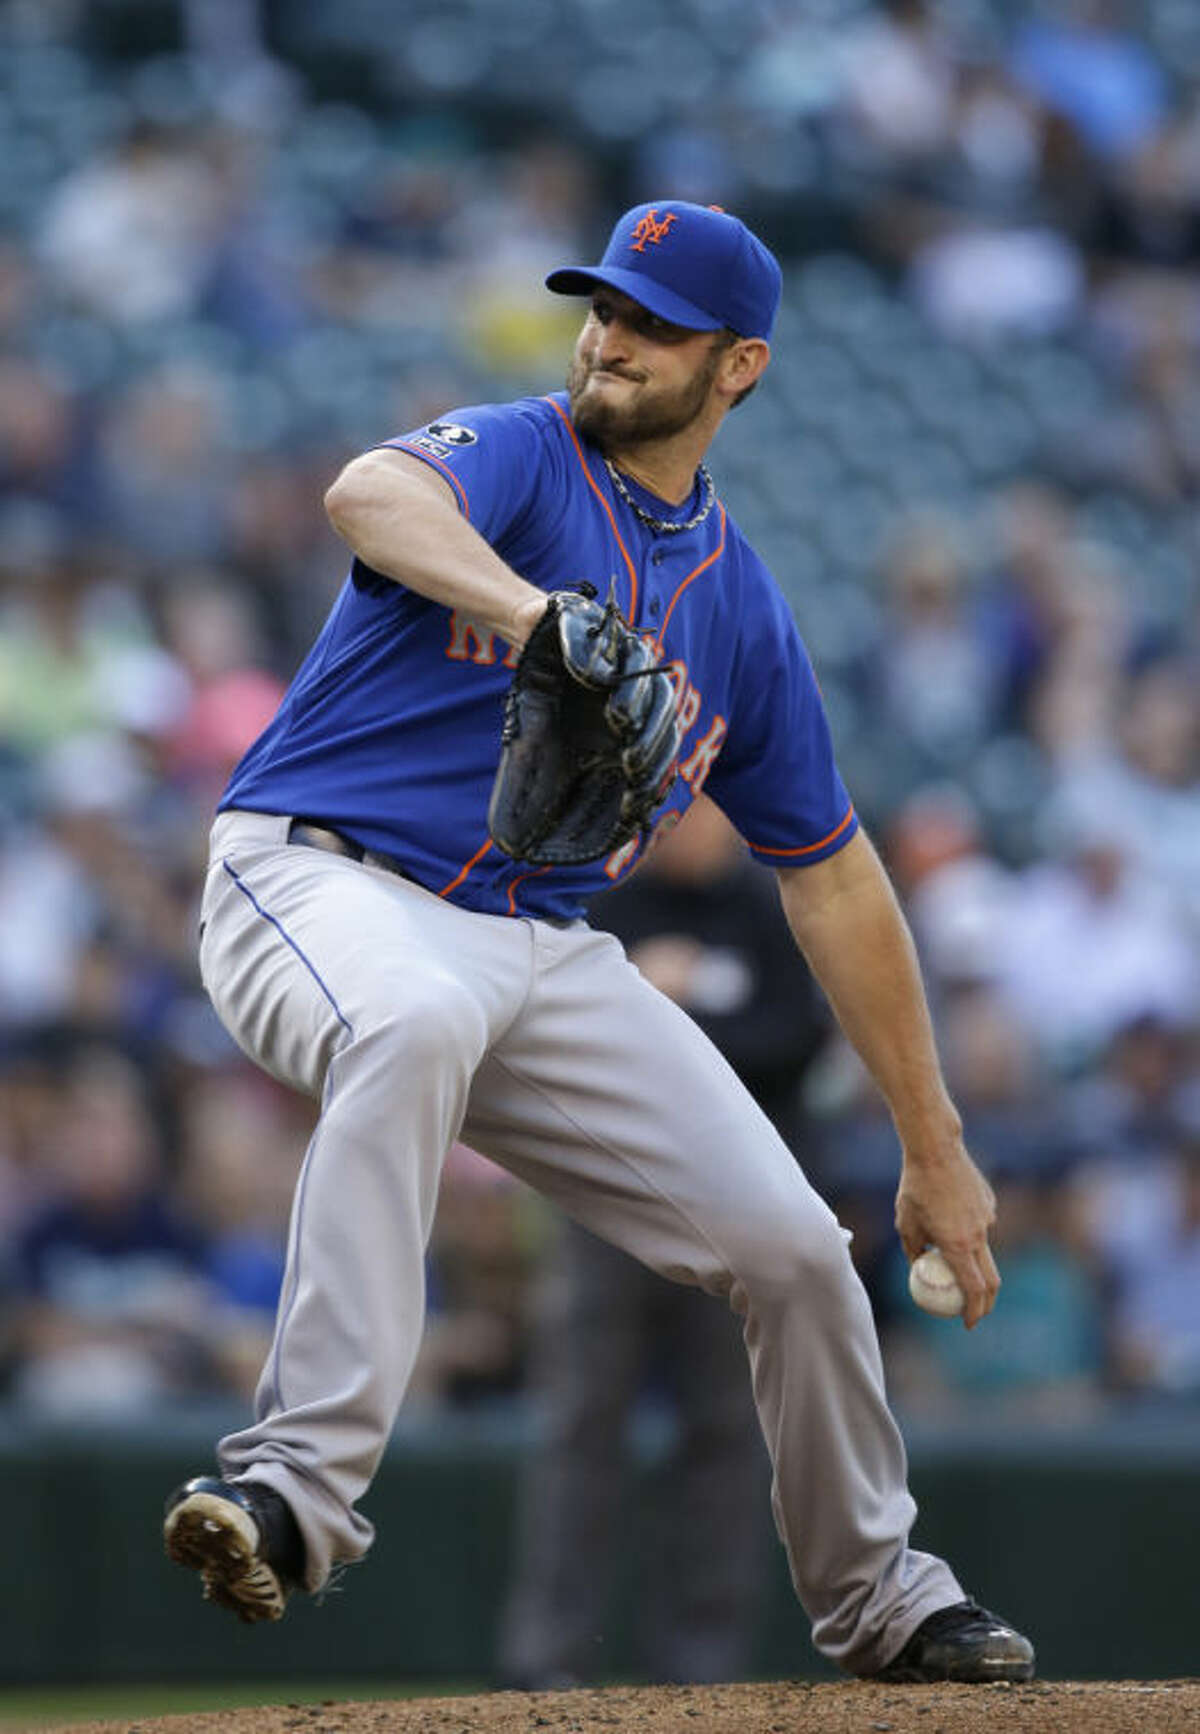 New York Mets starting pitcher Jonathon Niese throws against the Seattle Mariners in the first inning of a baseball game Monday, July 21, 2014, in Seattle. (AP Photo/Elaine Thompson)